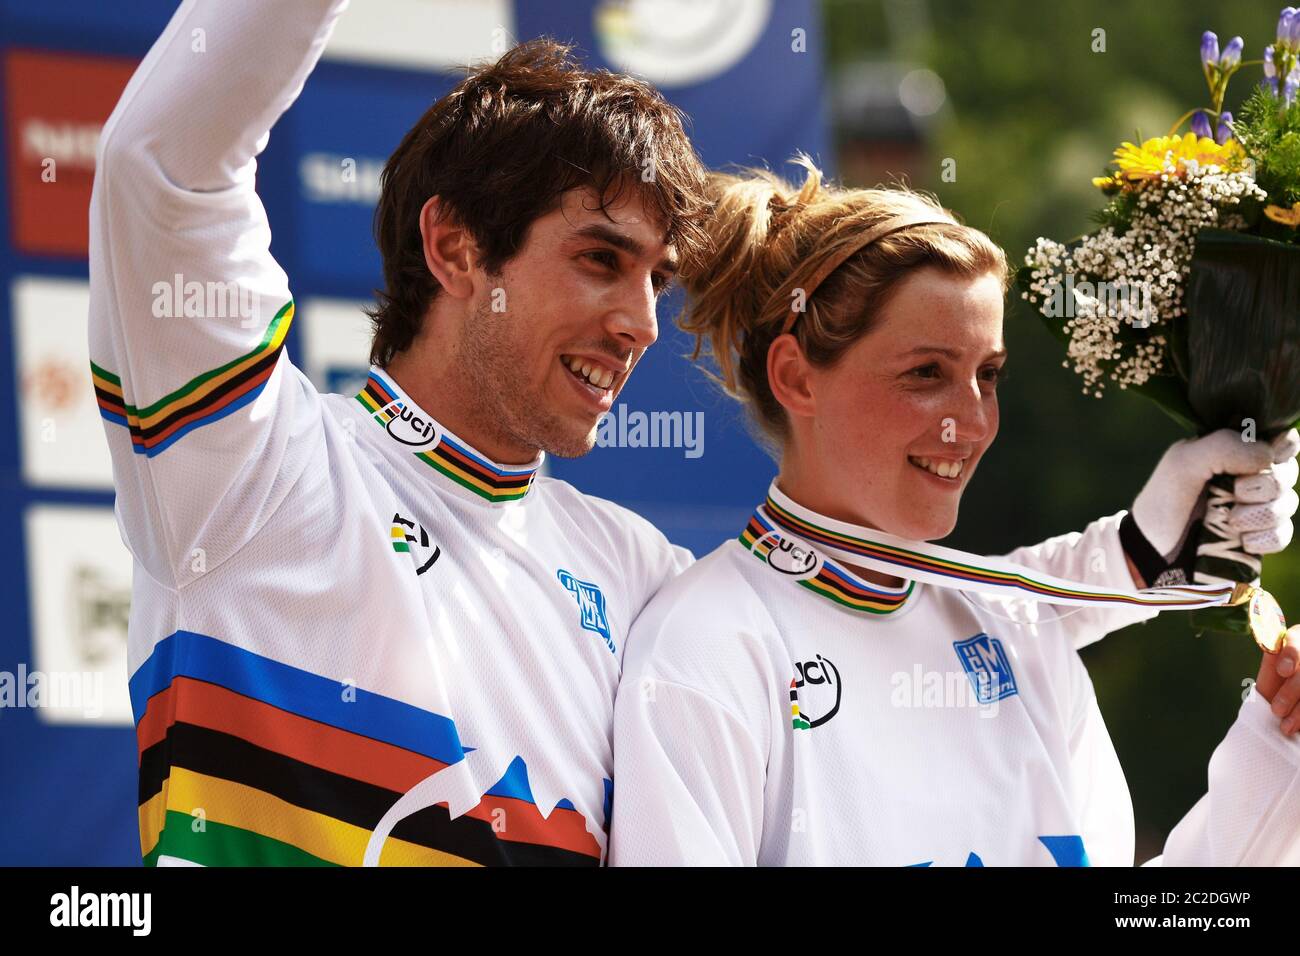 VAL DI SOLE, ITALY - JUNE 21, 2008. British siblings Gee and Rachel Atherton both won gold medals at the 2008 UCI Mountain BIke Downhill World Champio Stock Photo